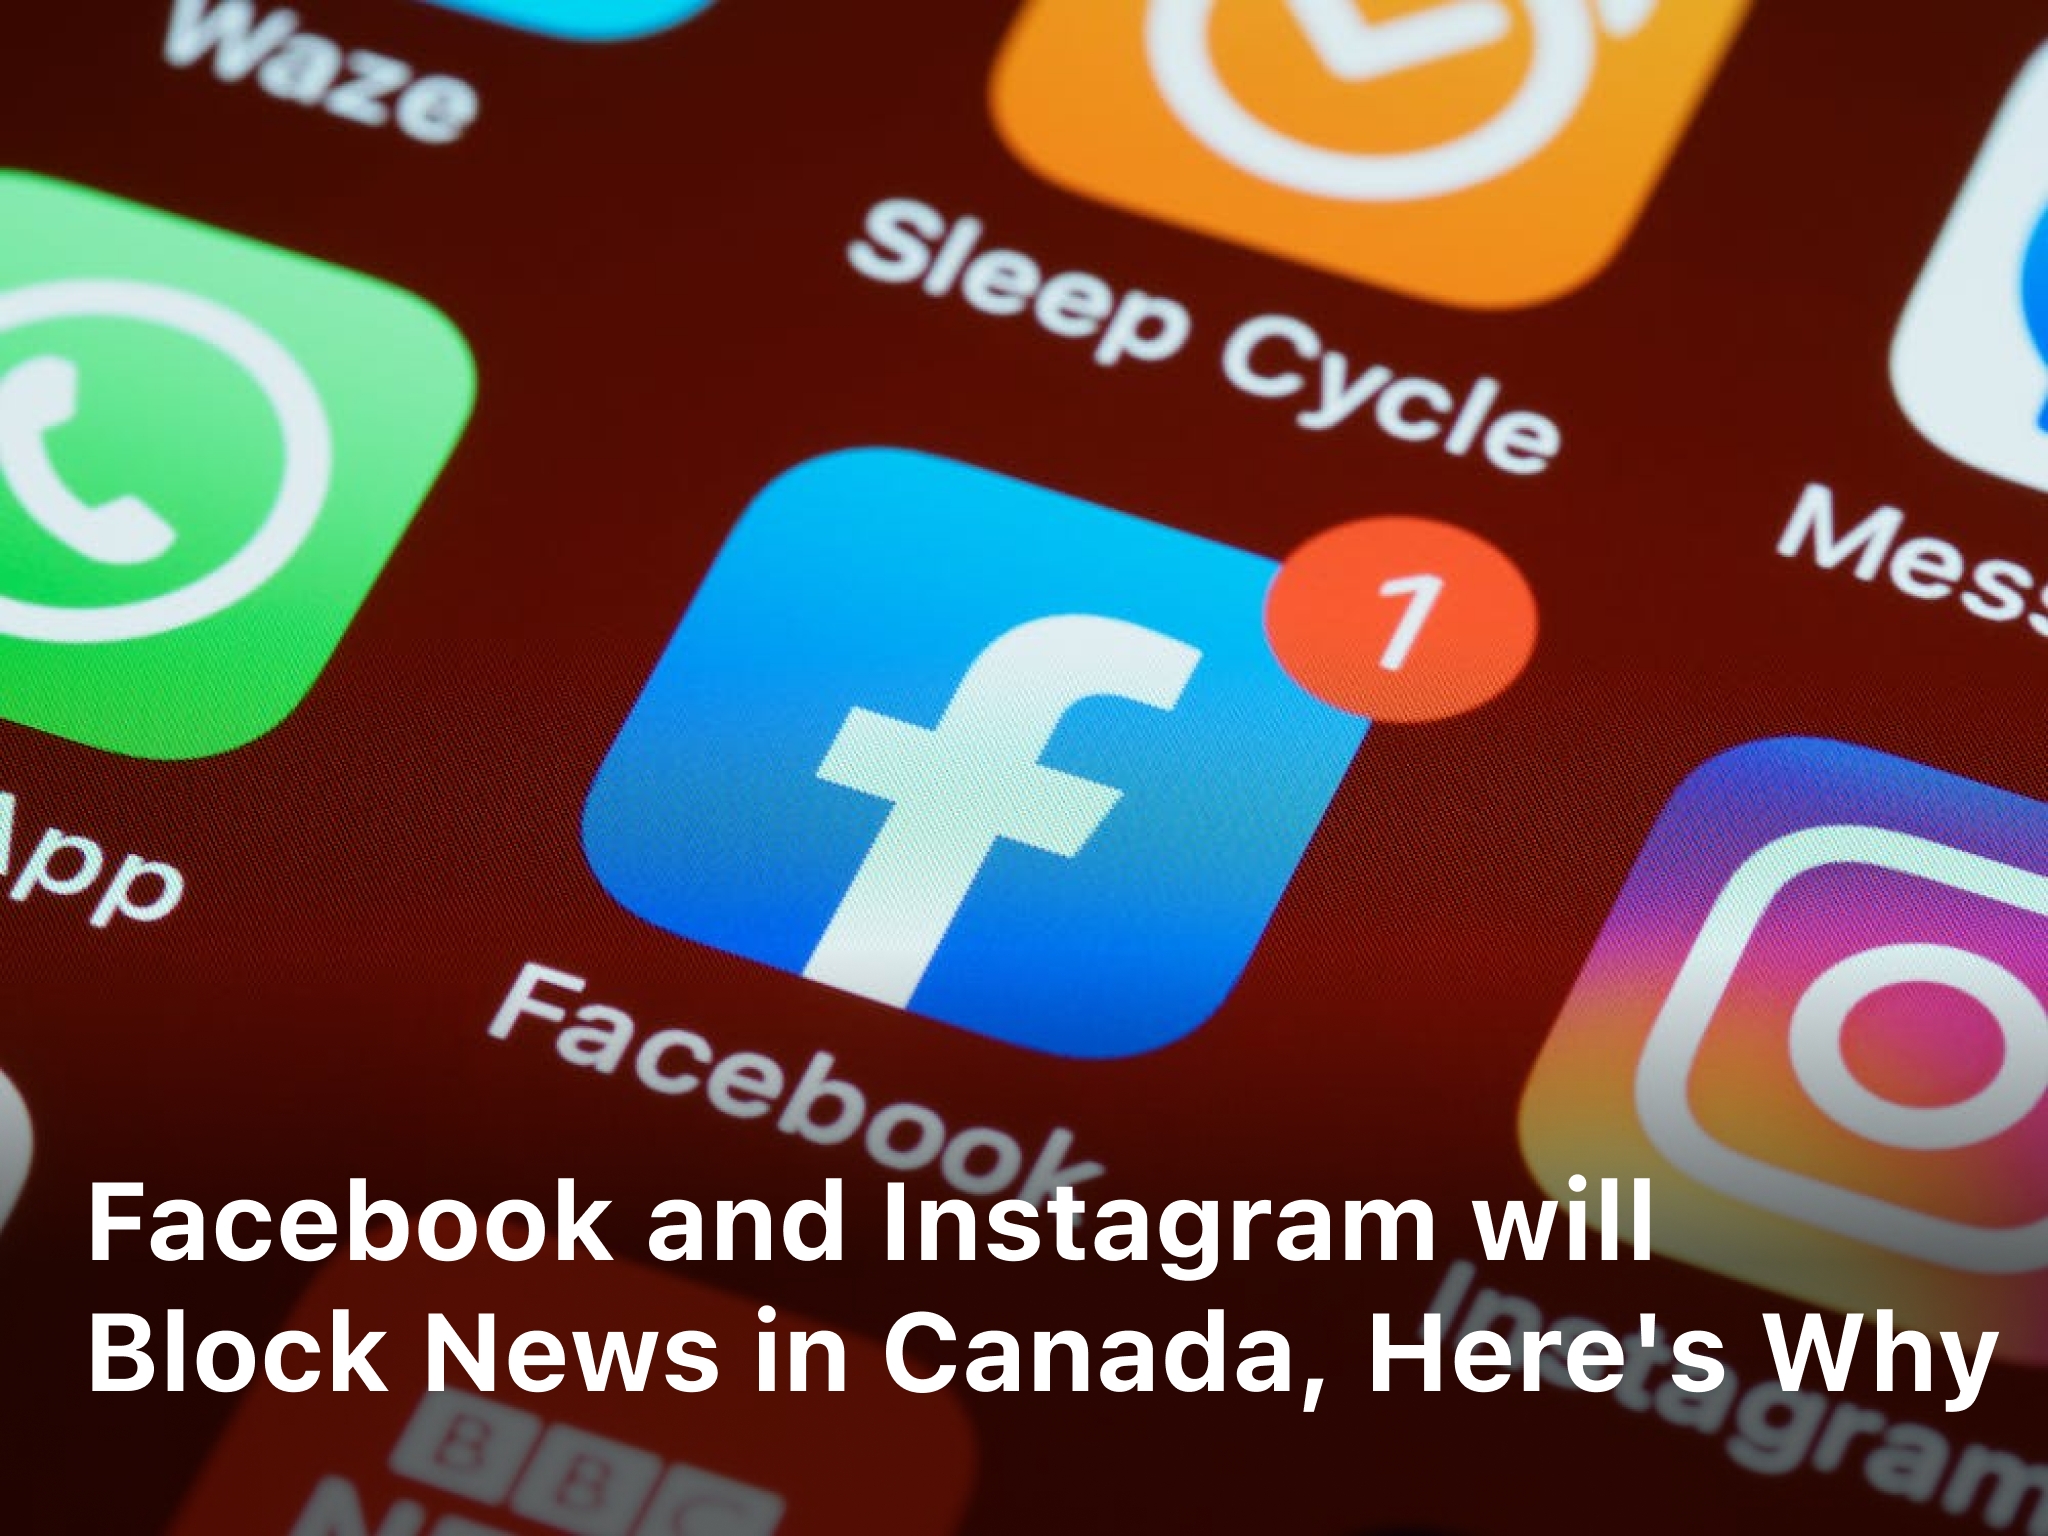 Facebook and Instagram will Block News in Canada